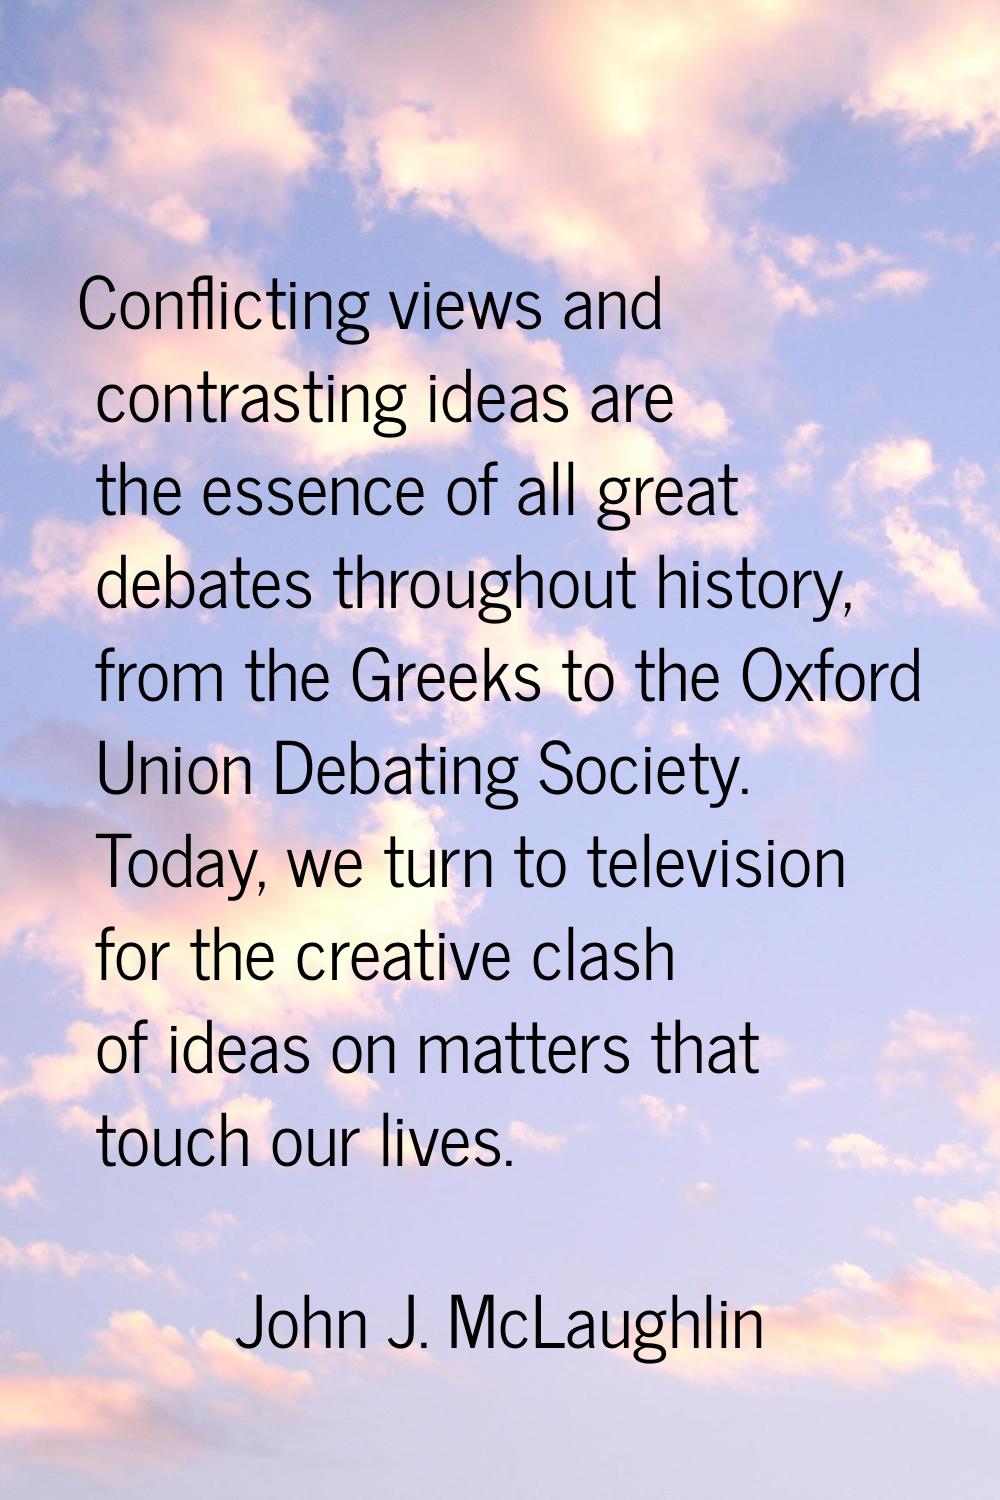 Conflicting views and contrasting ideas are the essence of all great debates throughout history, fr